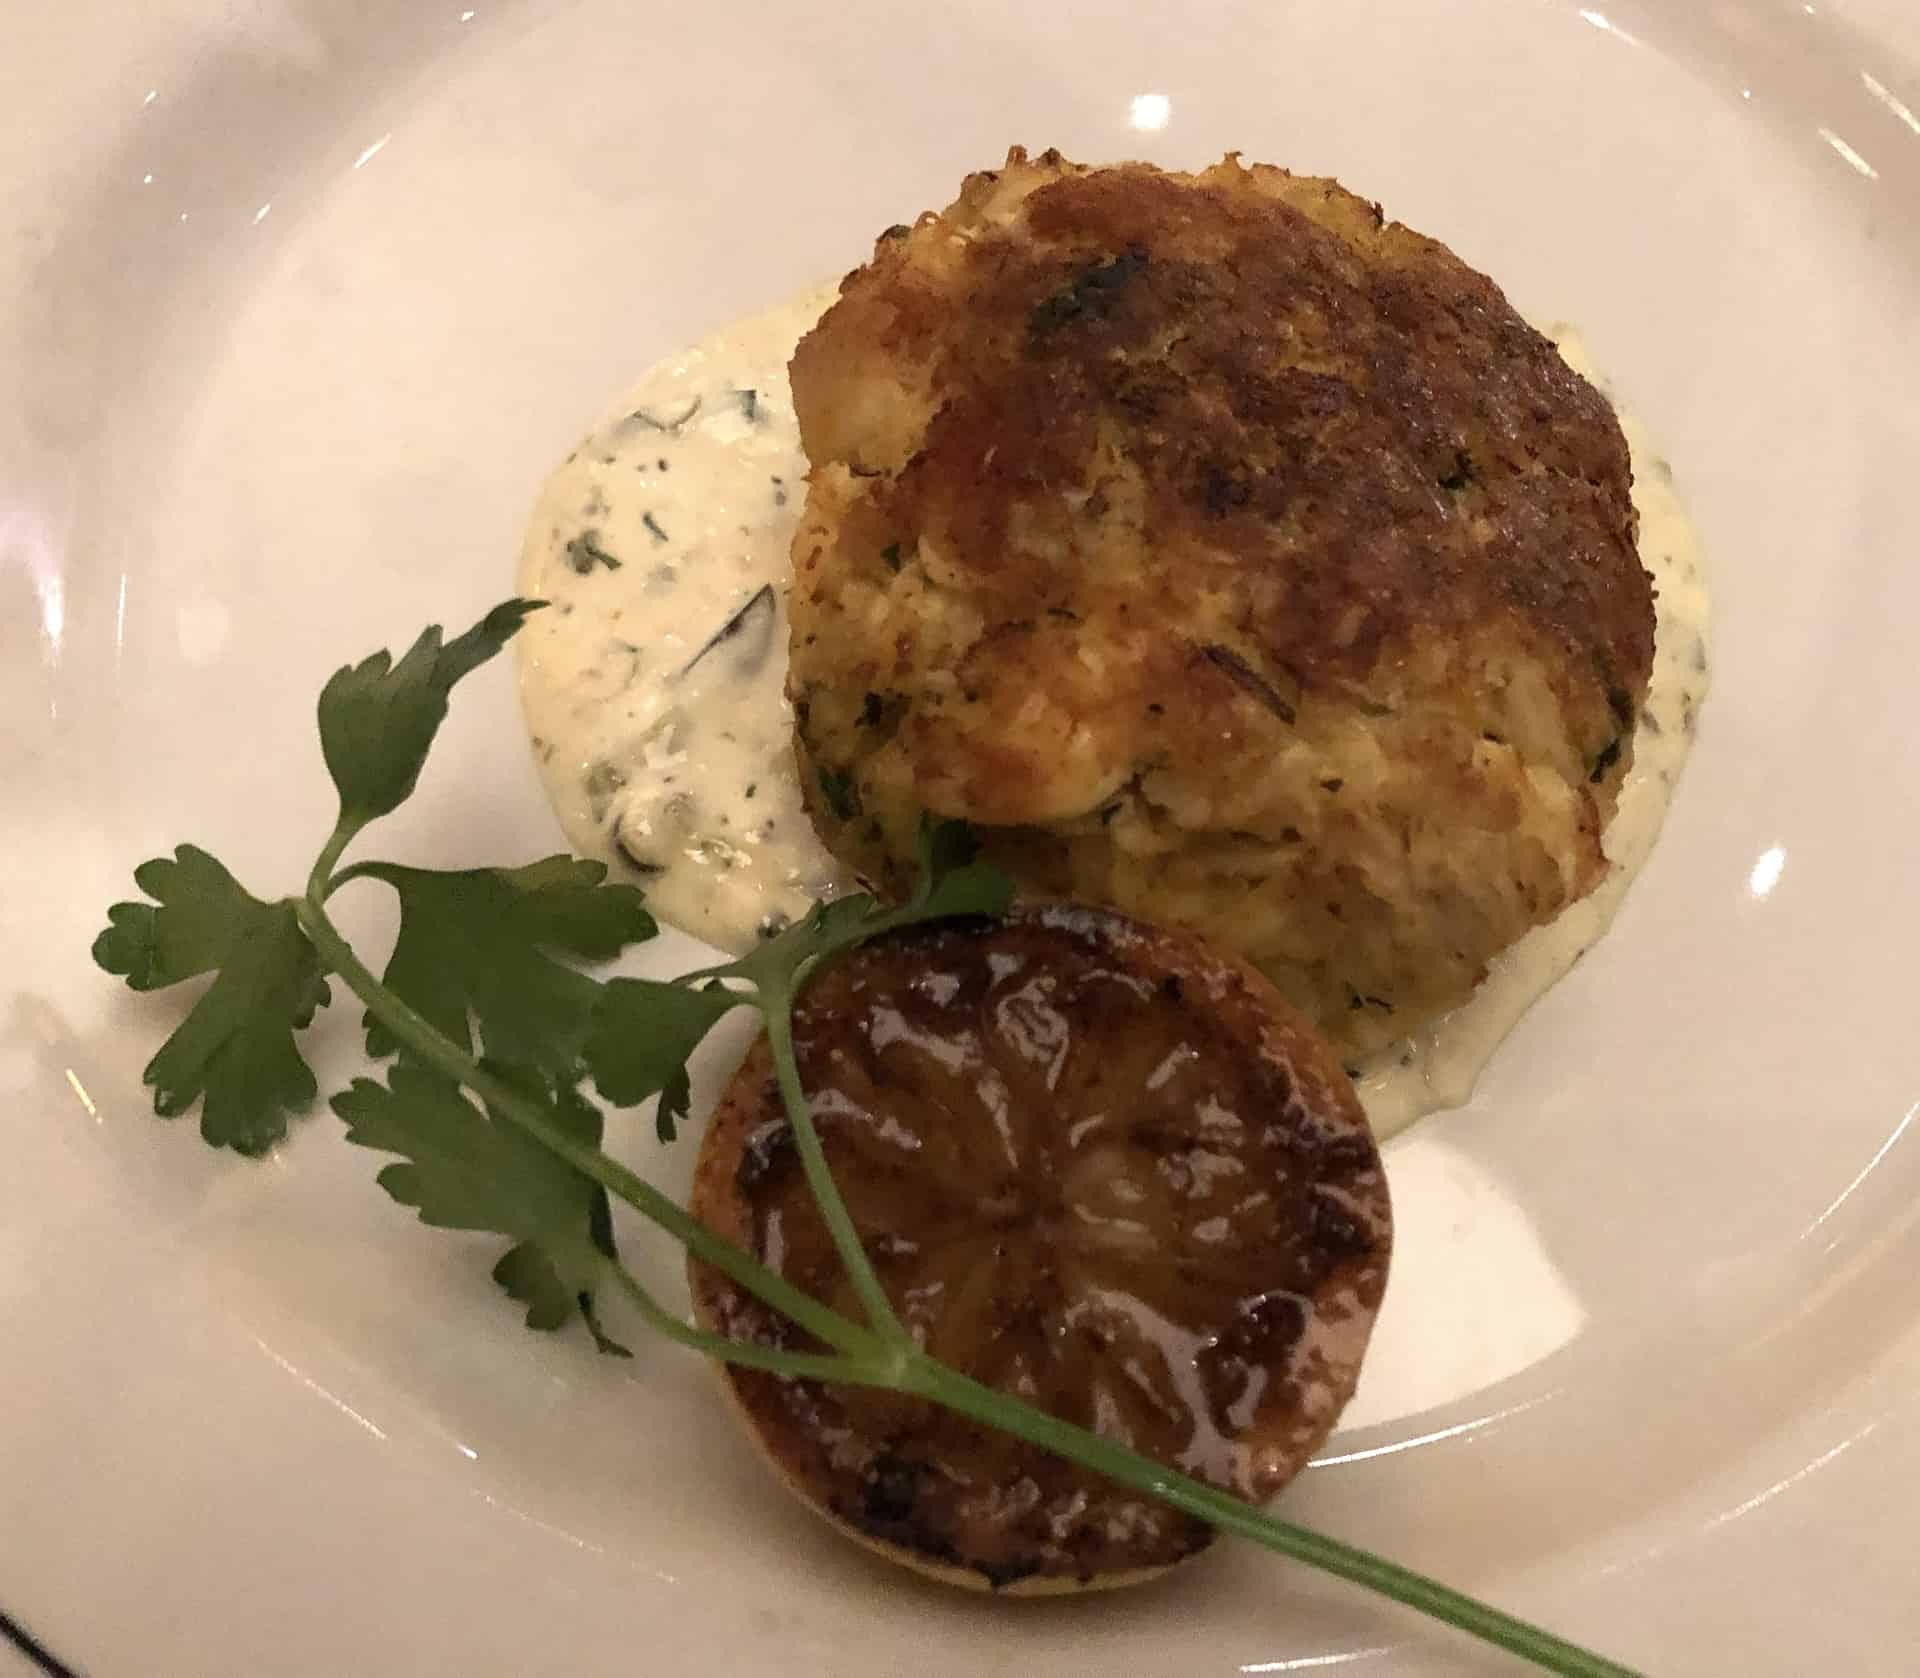 Crab cake at Truluck's